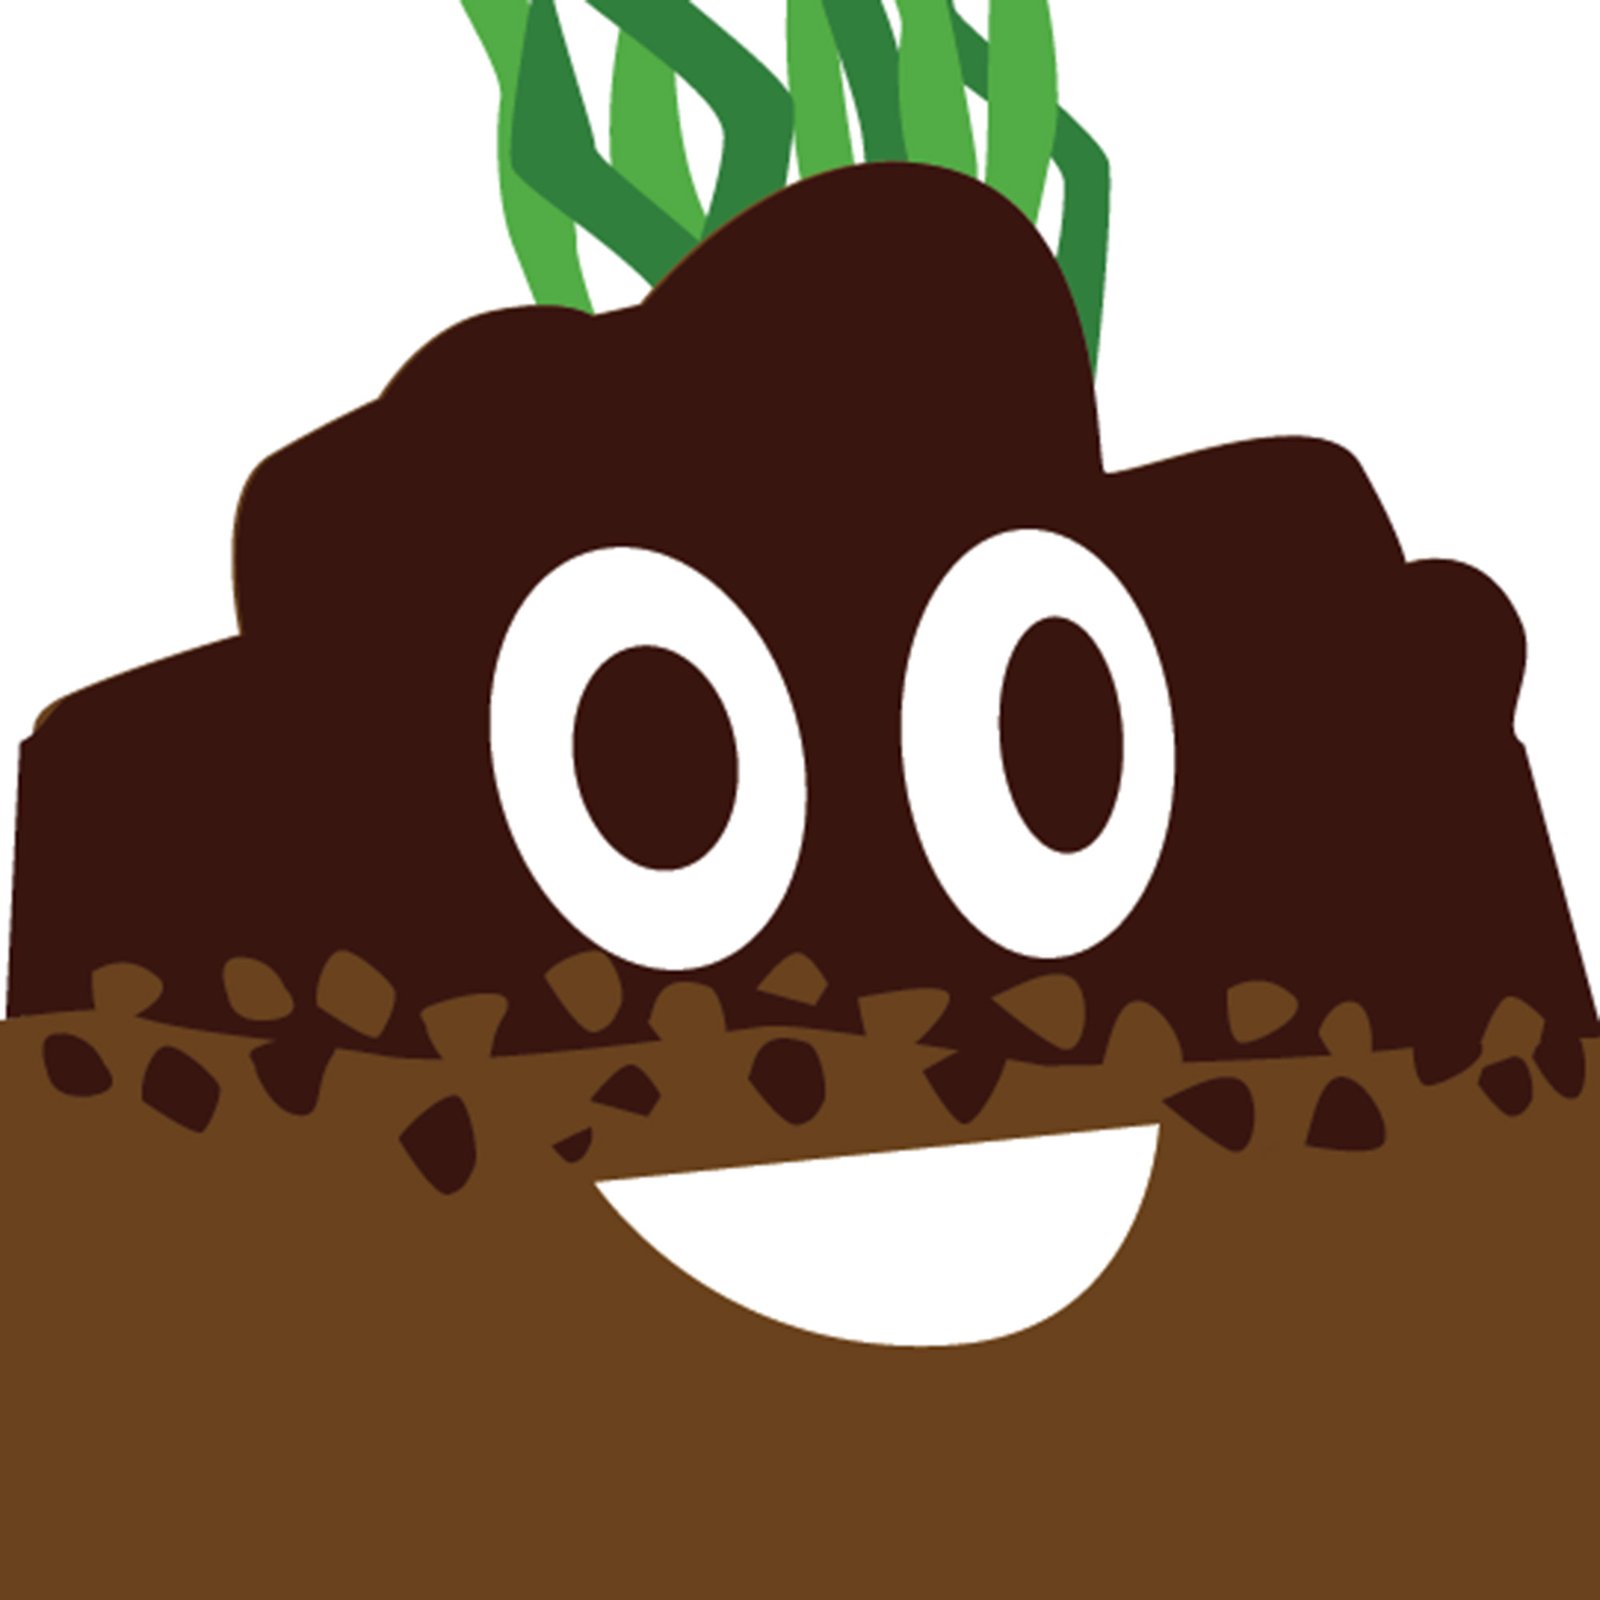 A dirt emoji that has a small tuft of green grass hair above a happy face in a dark brown lump, above a lighter brown base that fills the bottom of the frame, with a transitional area of smaller clumps.